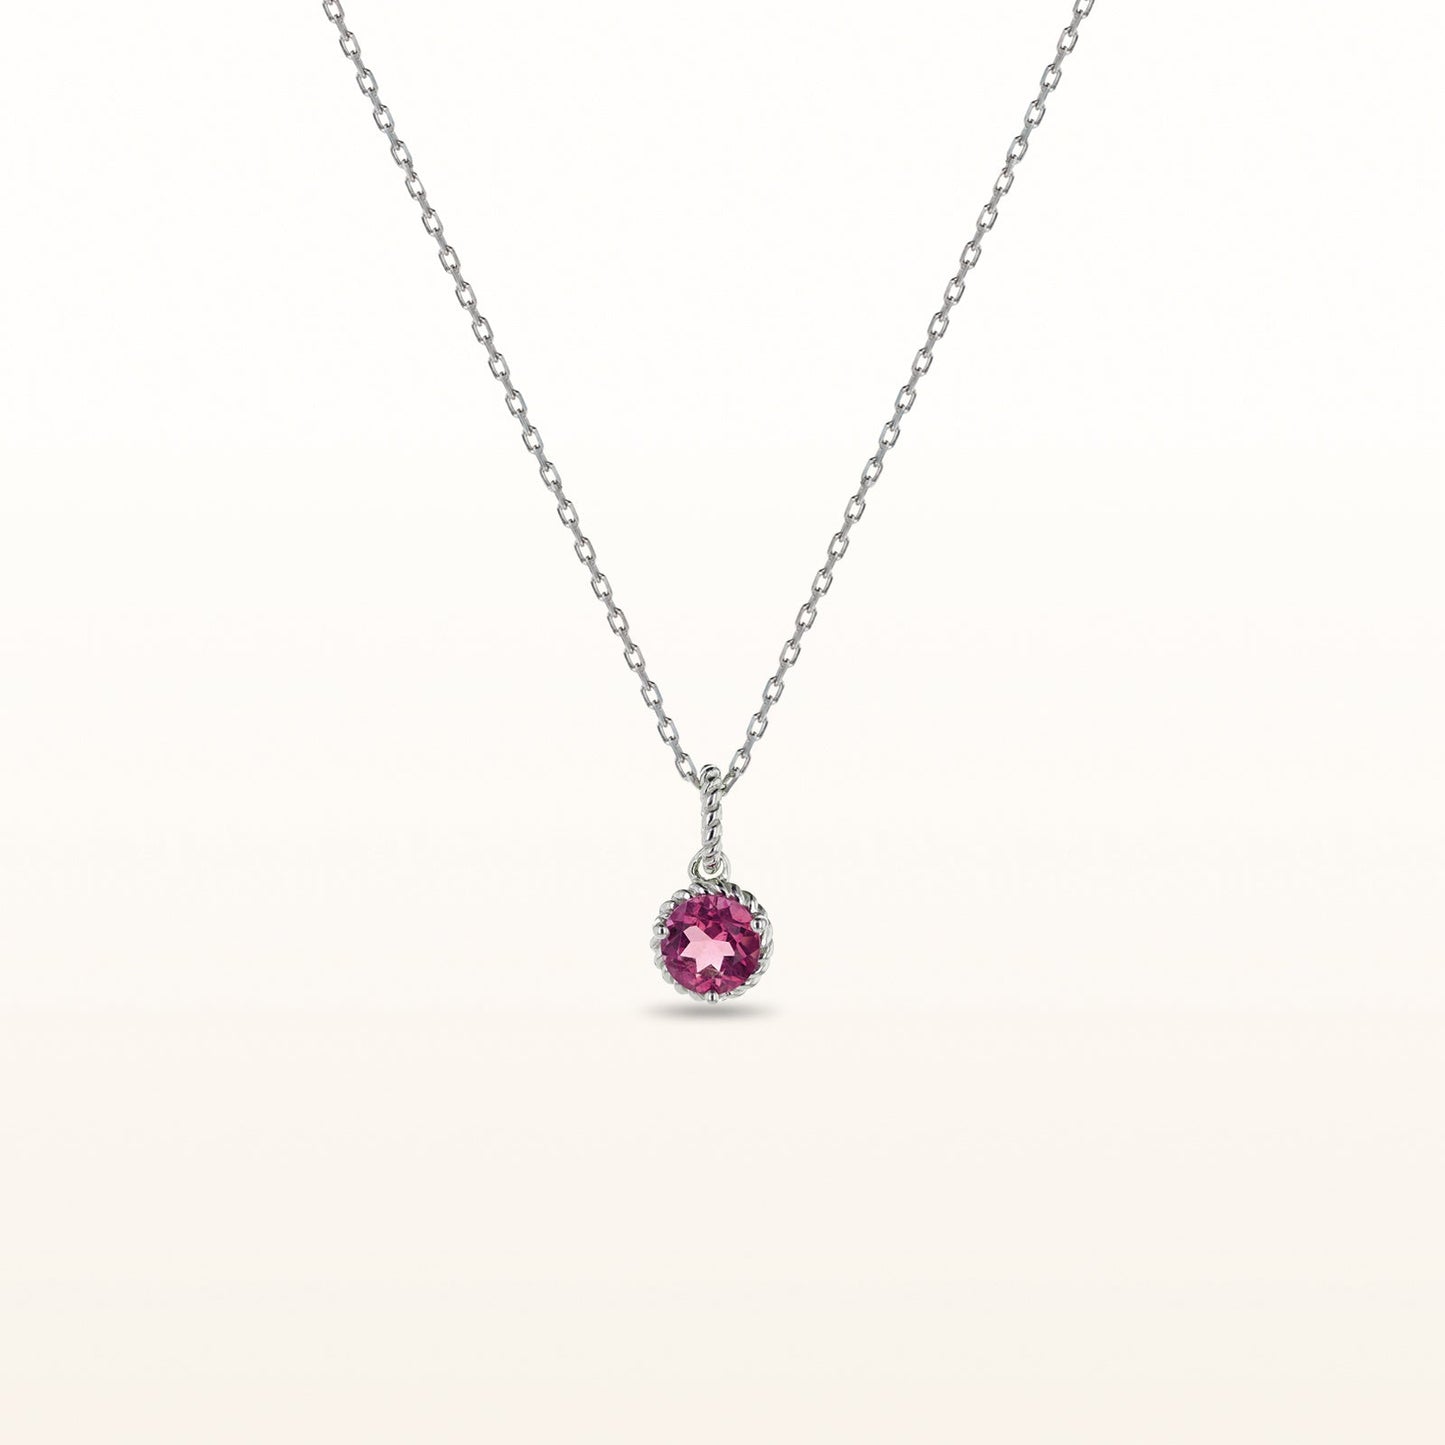 Round Gemstone Cable Necklace in Sterling Silver